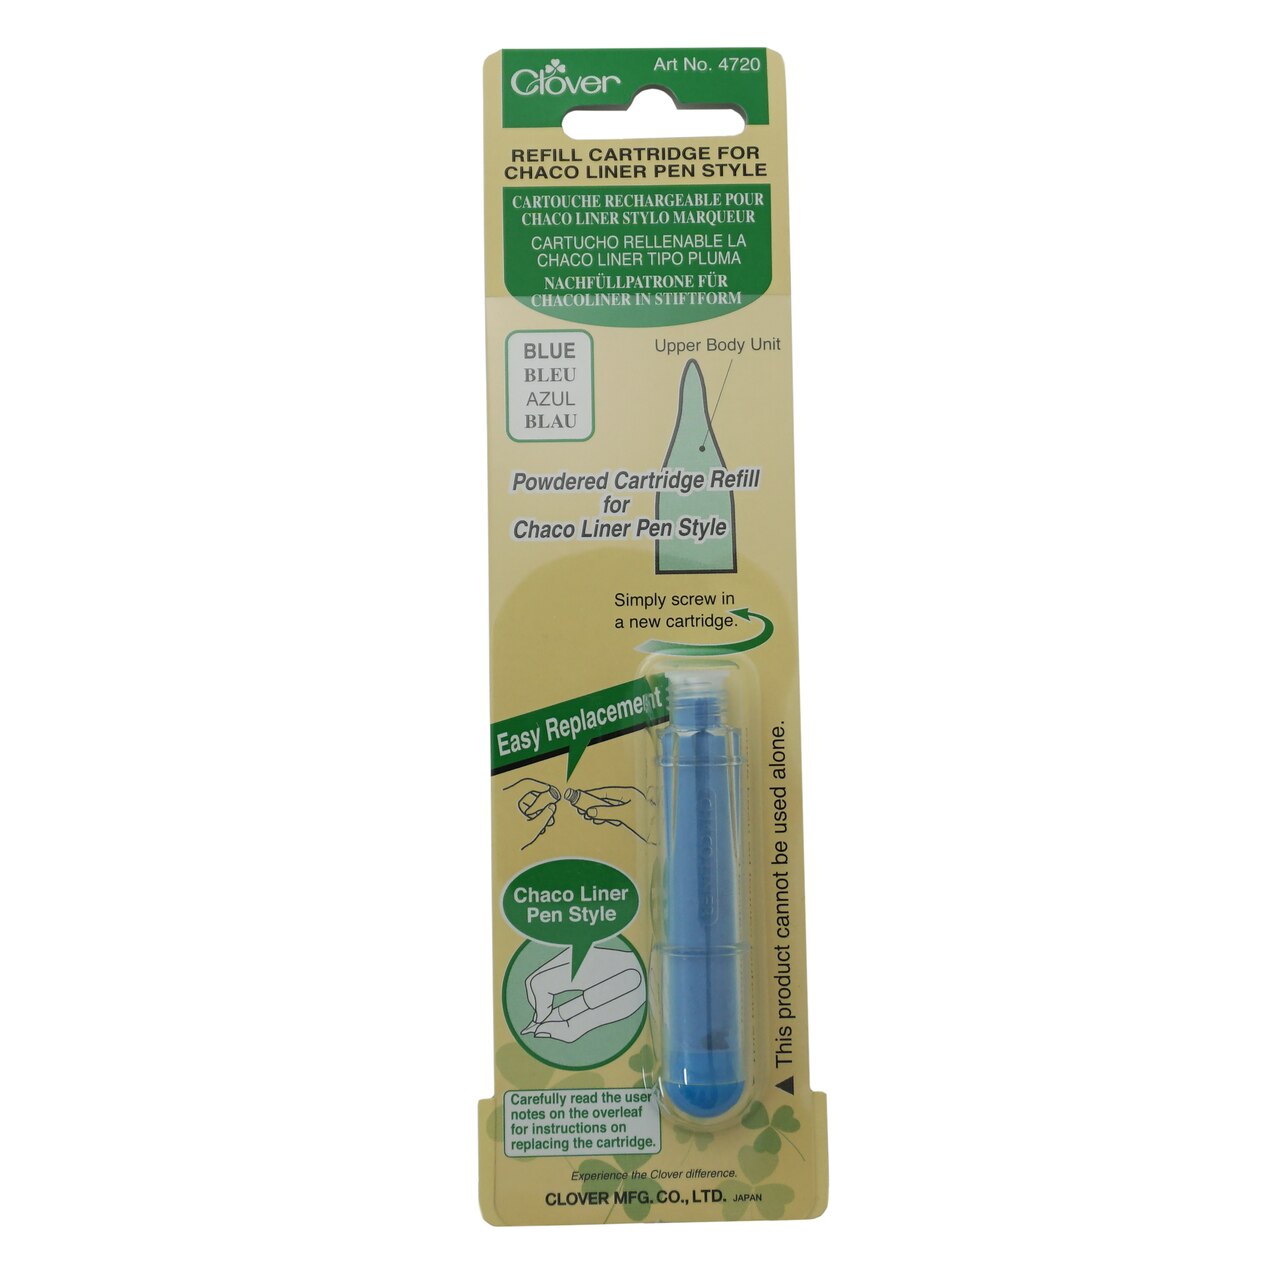 Clover Refill Cartridge for Chaco Liner